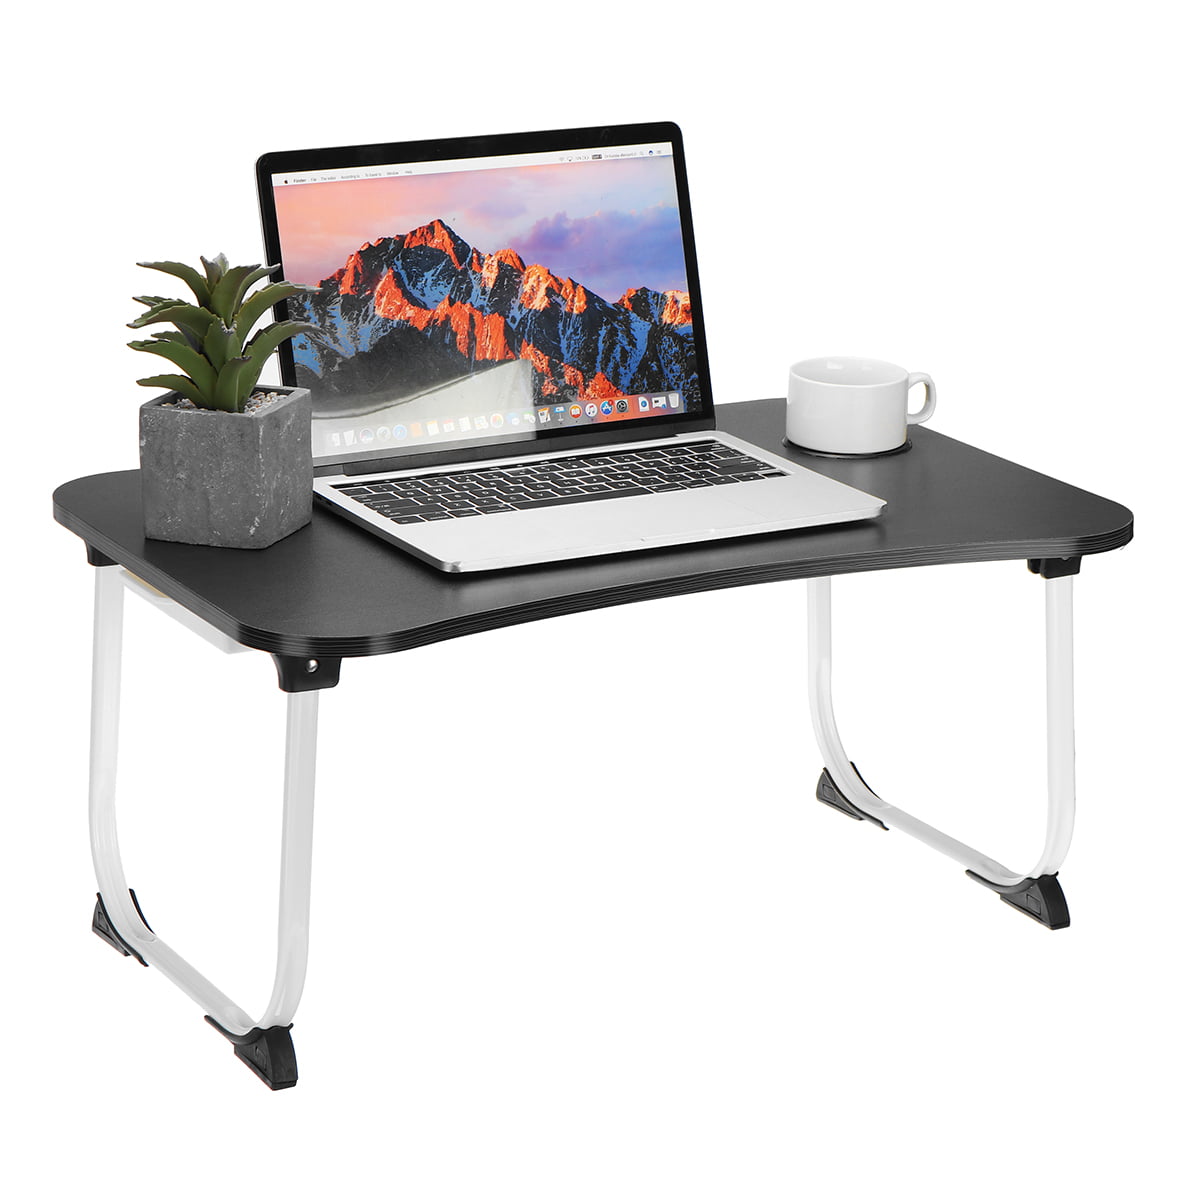 Foldable Computer Desk Laptop PC Table Stand Lapdesk Tray Notebook Desk